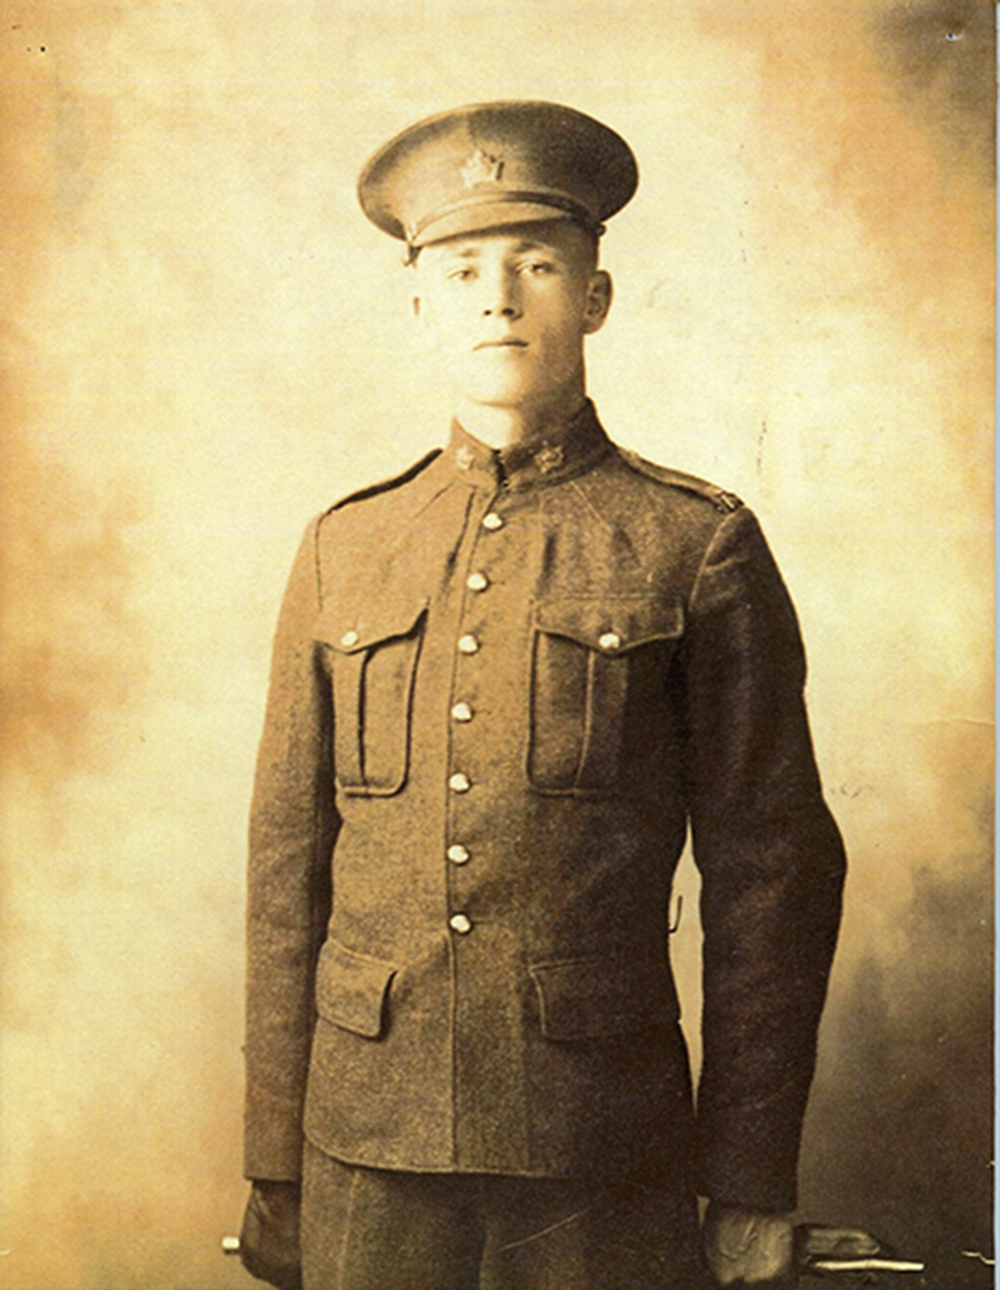 A yellow-tinted black and white picture of a soldier in a uniform looking resolutely at the camera.